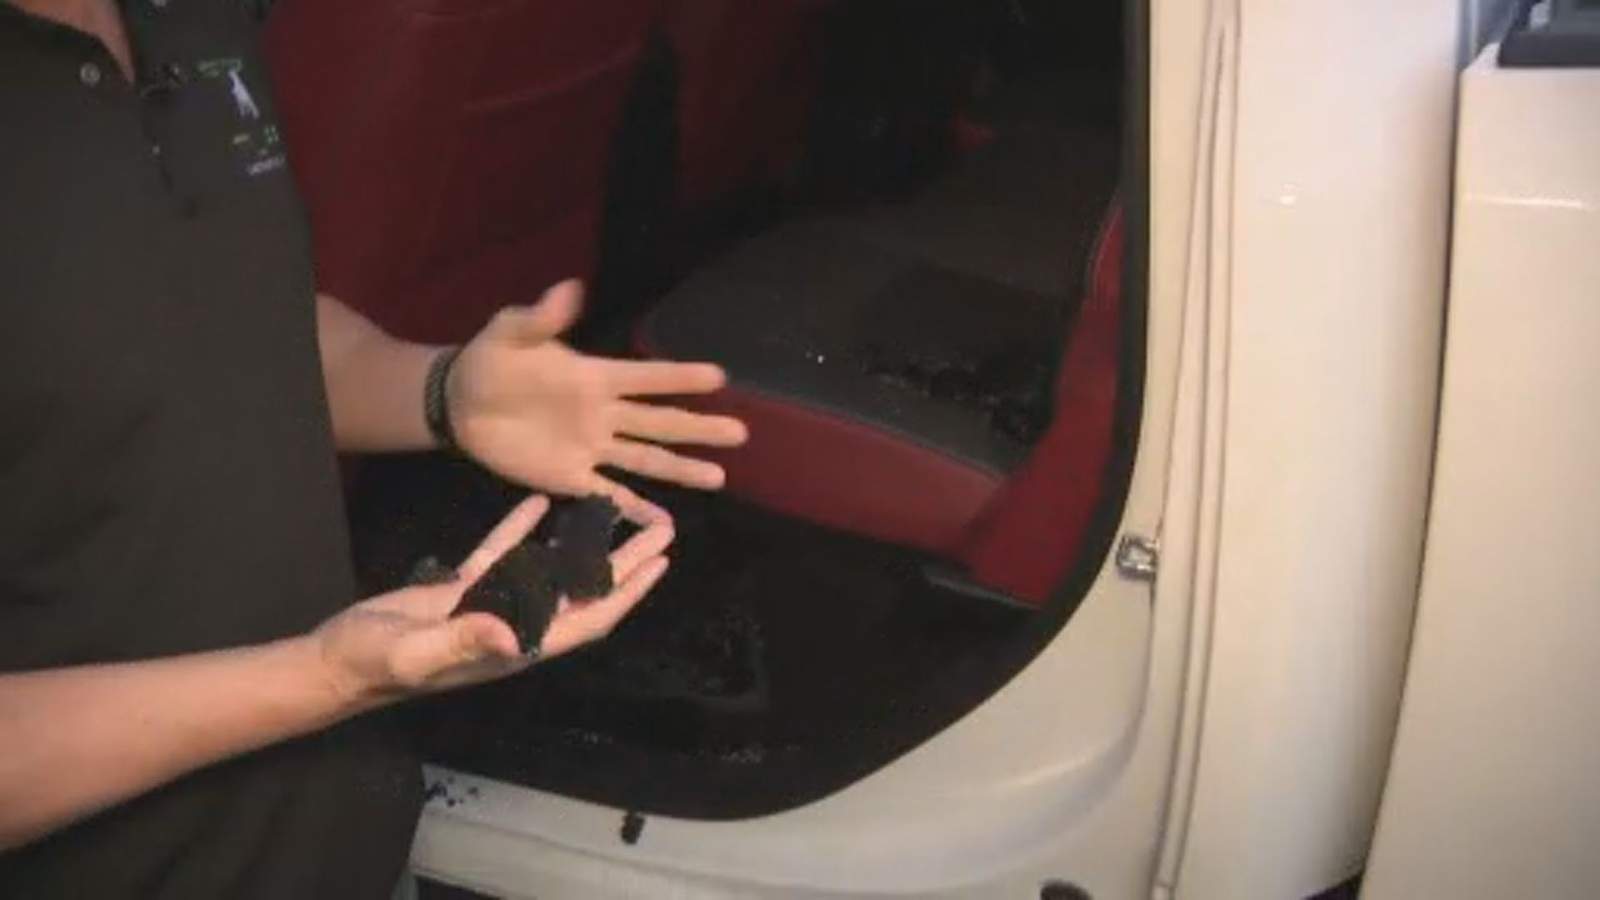 Thief targets several disabled veterans' trucks during Marine Corps Ball in Houston